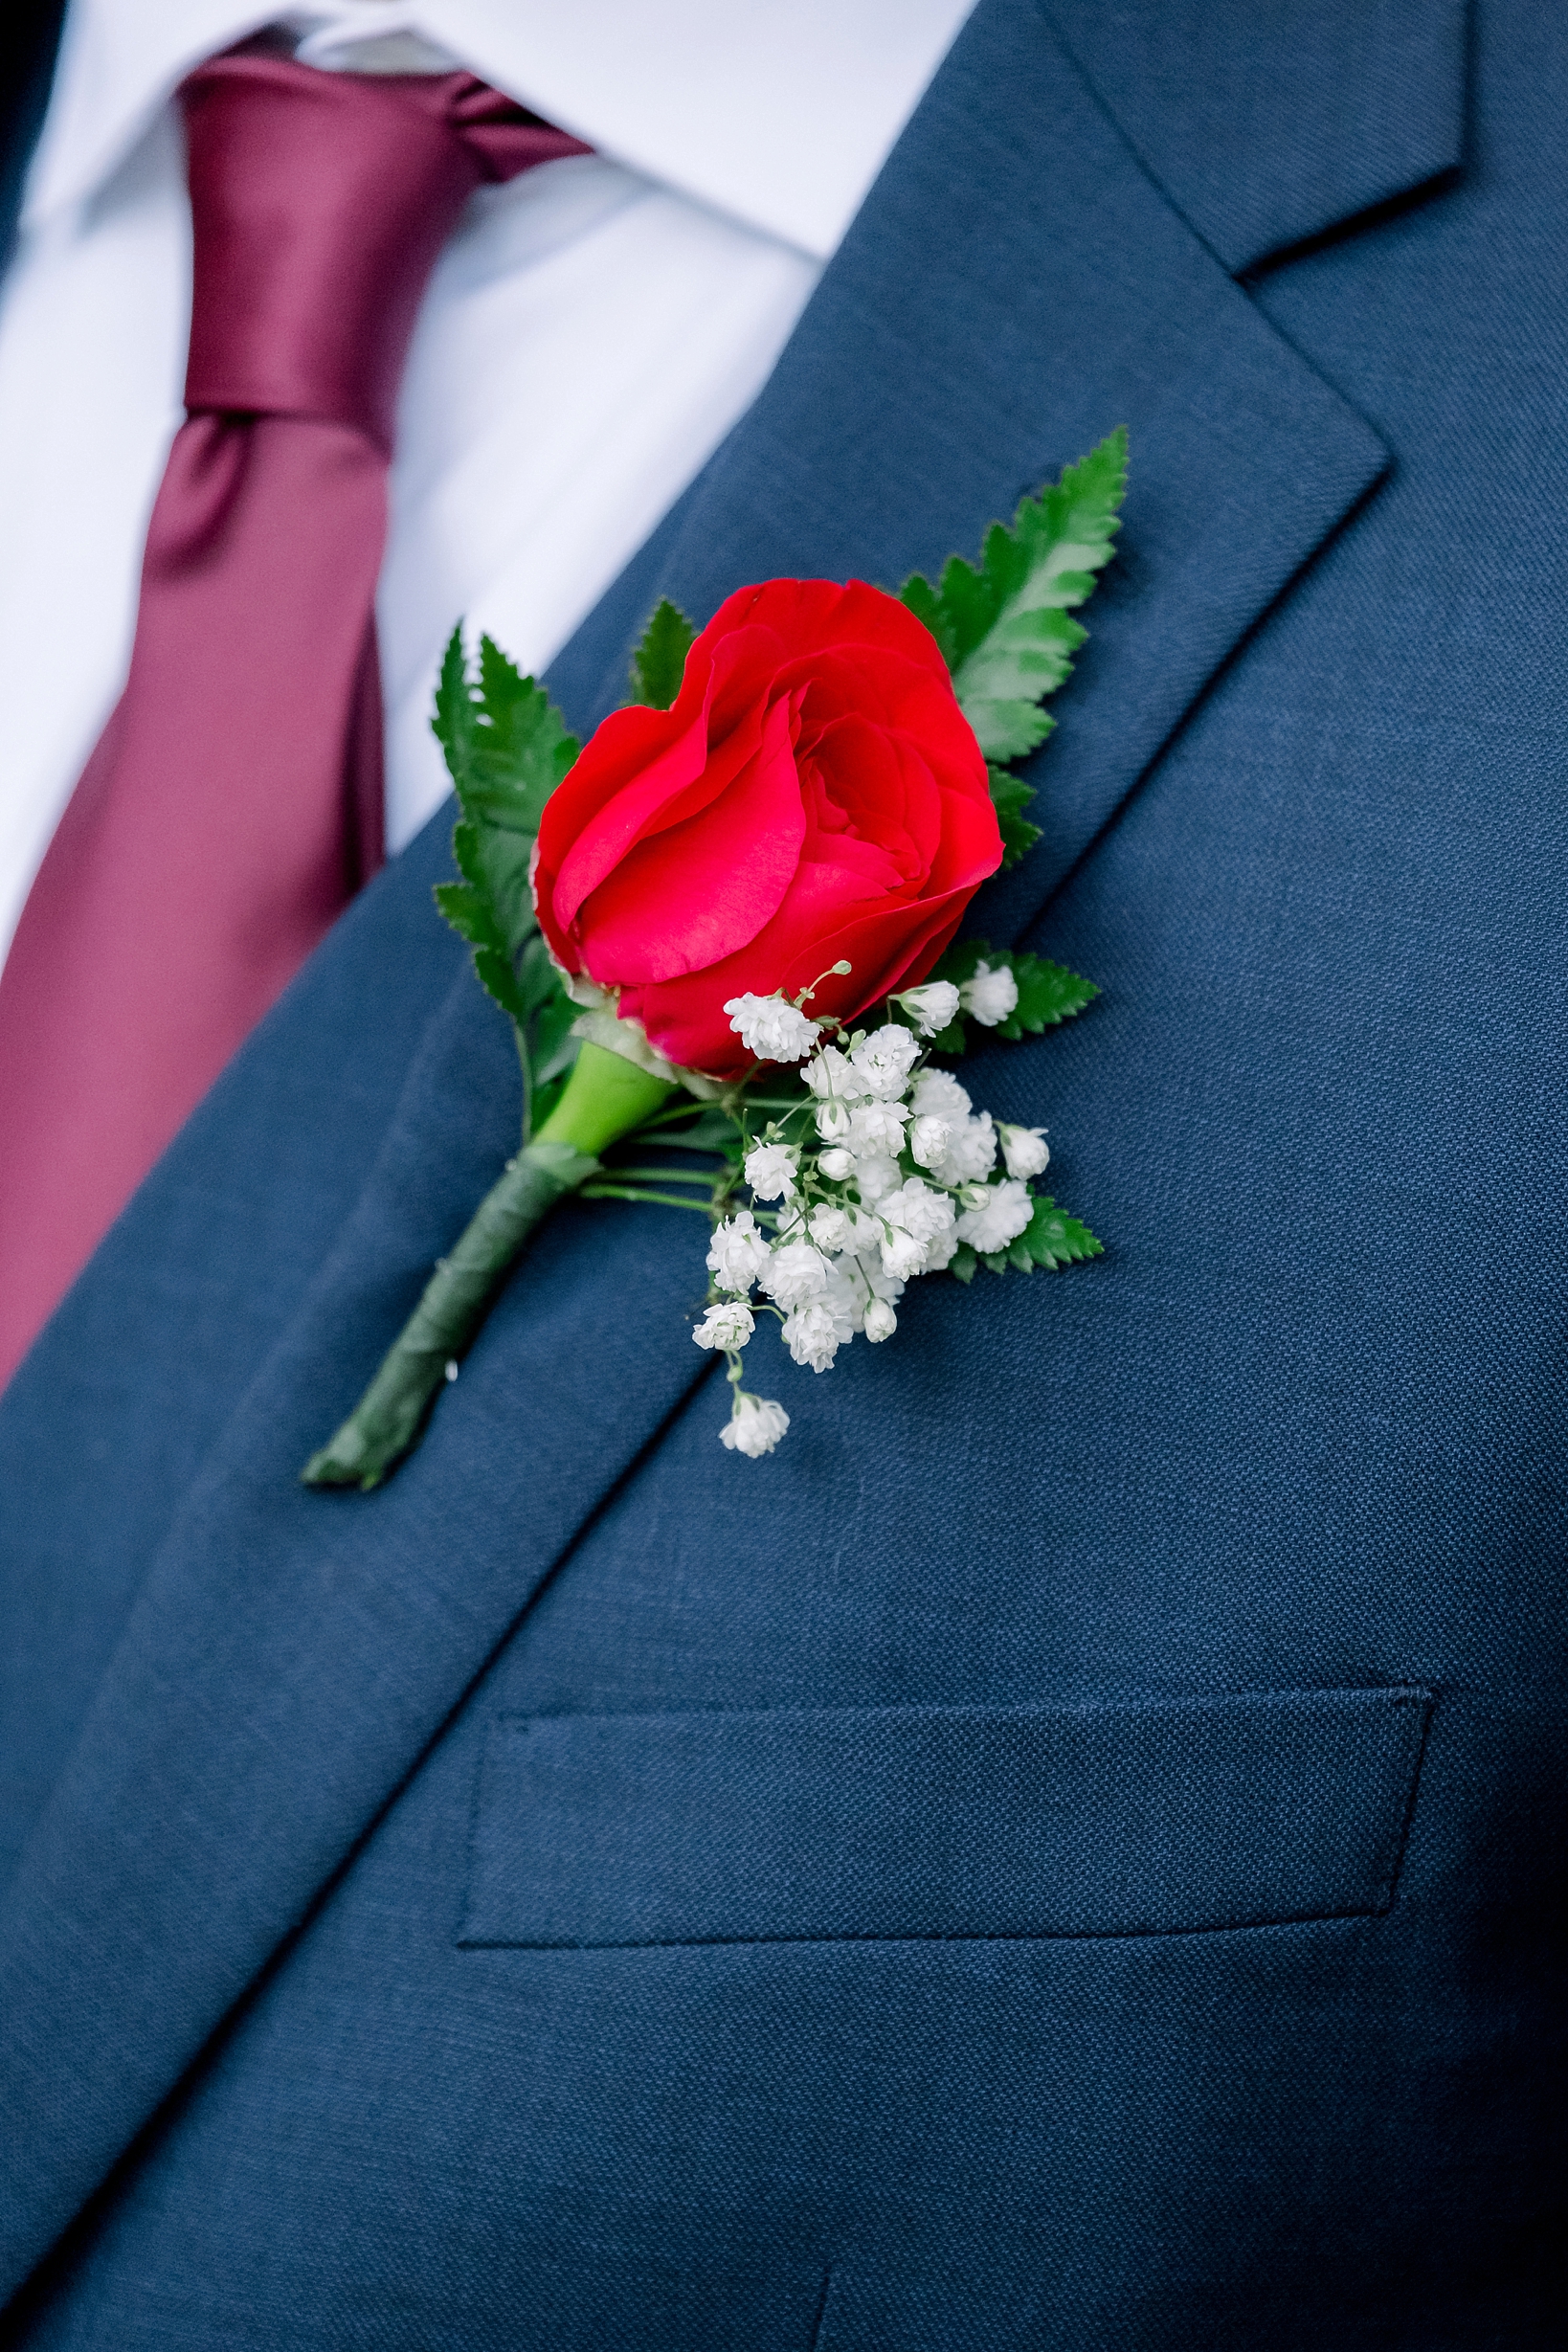 The red rose of the Groom's boutonniere by sarahben.com